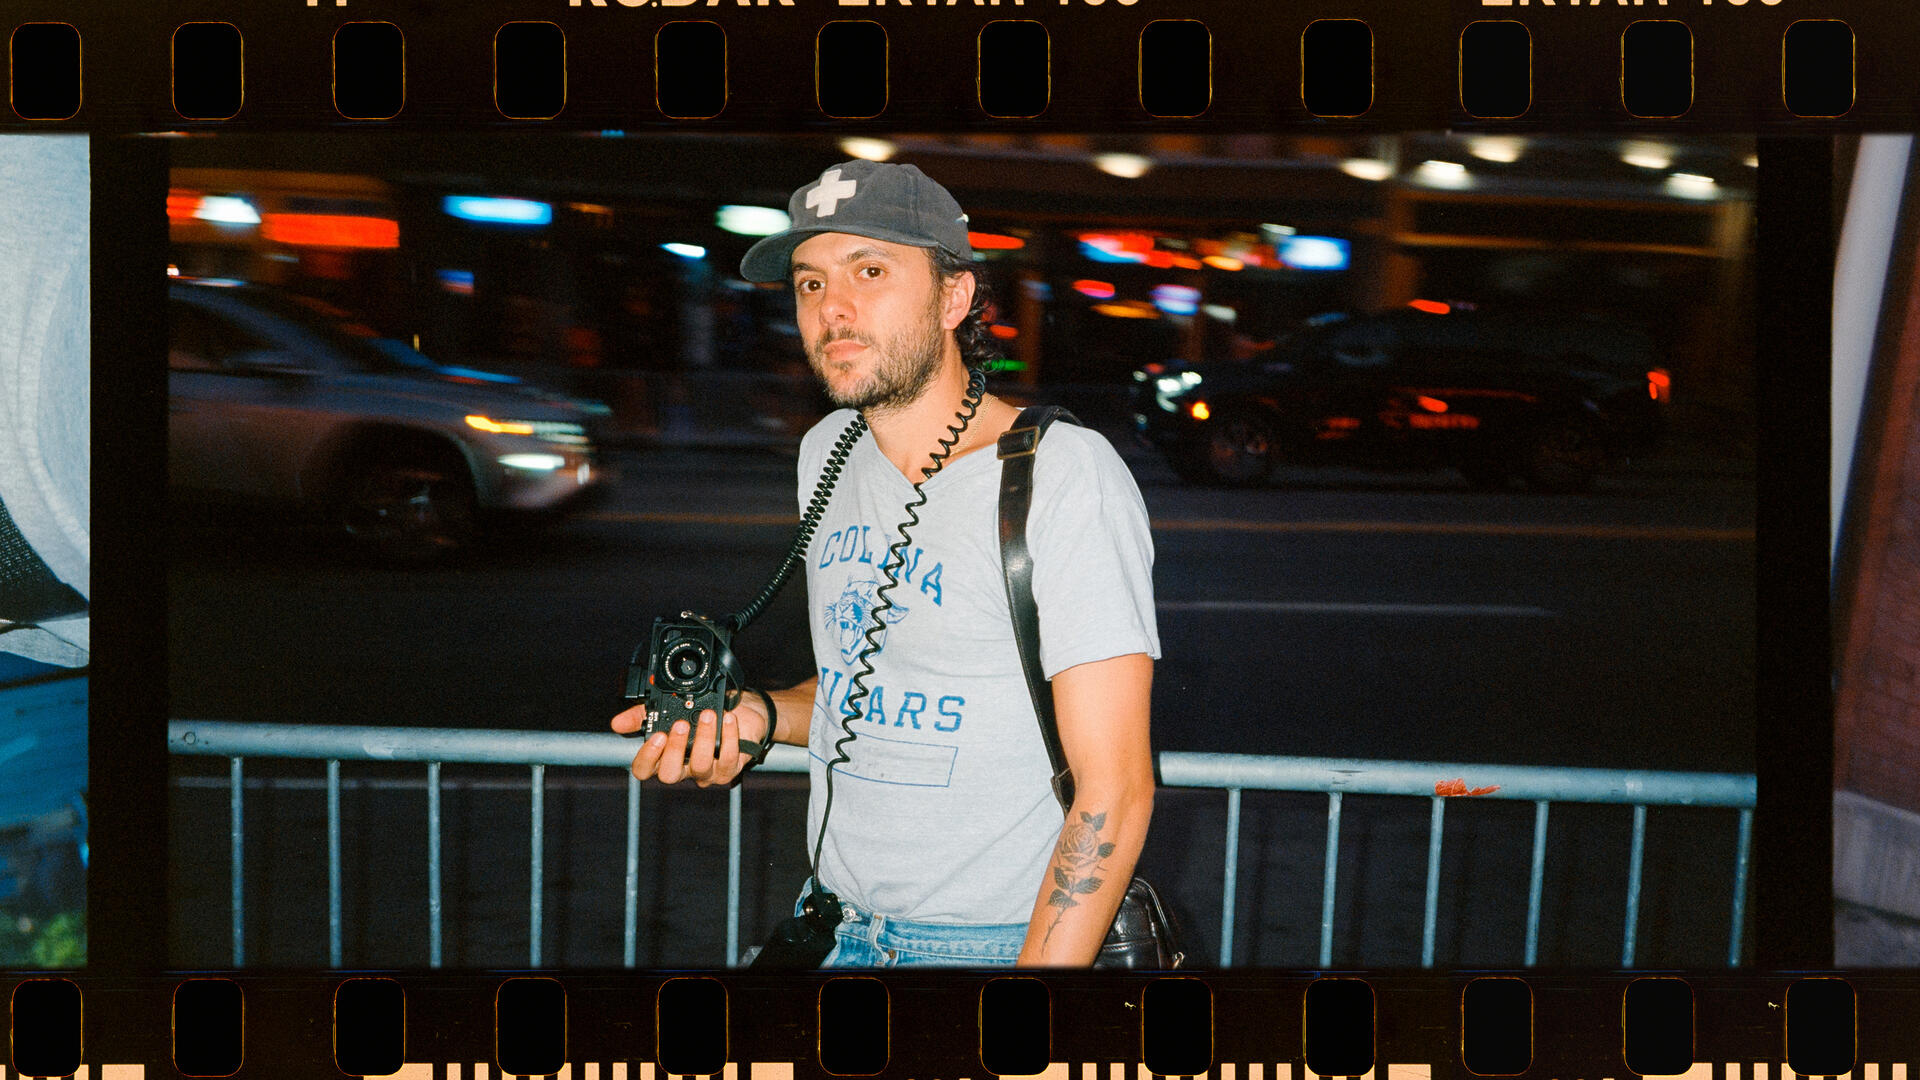 Joe Greer with the new Leica M6 in Nashville. | Leica Camera AG